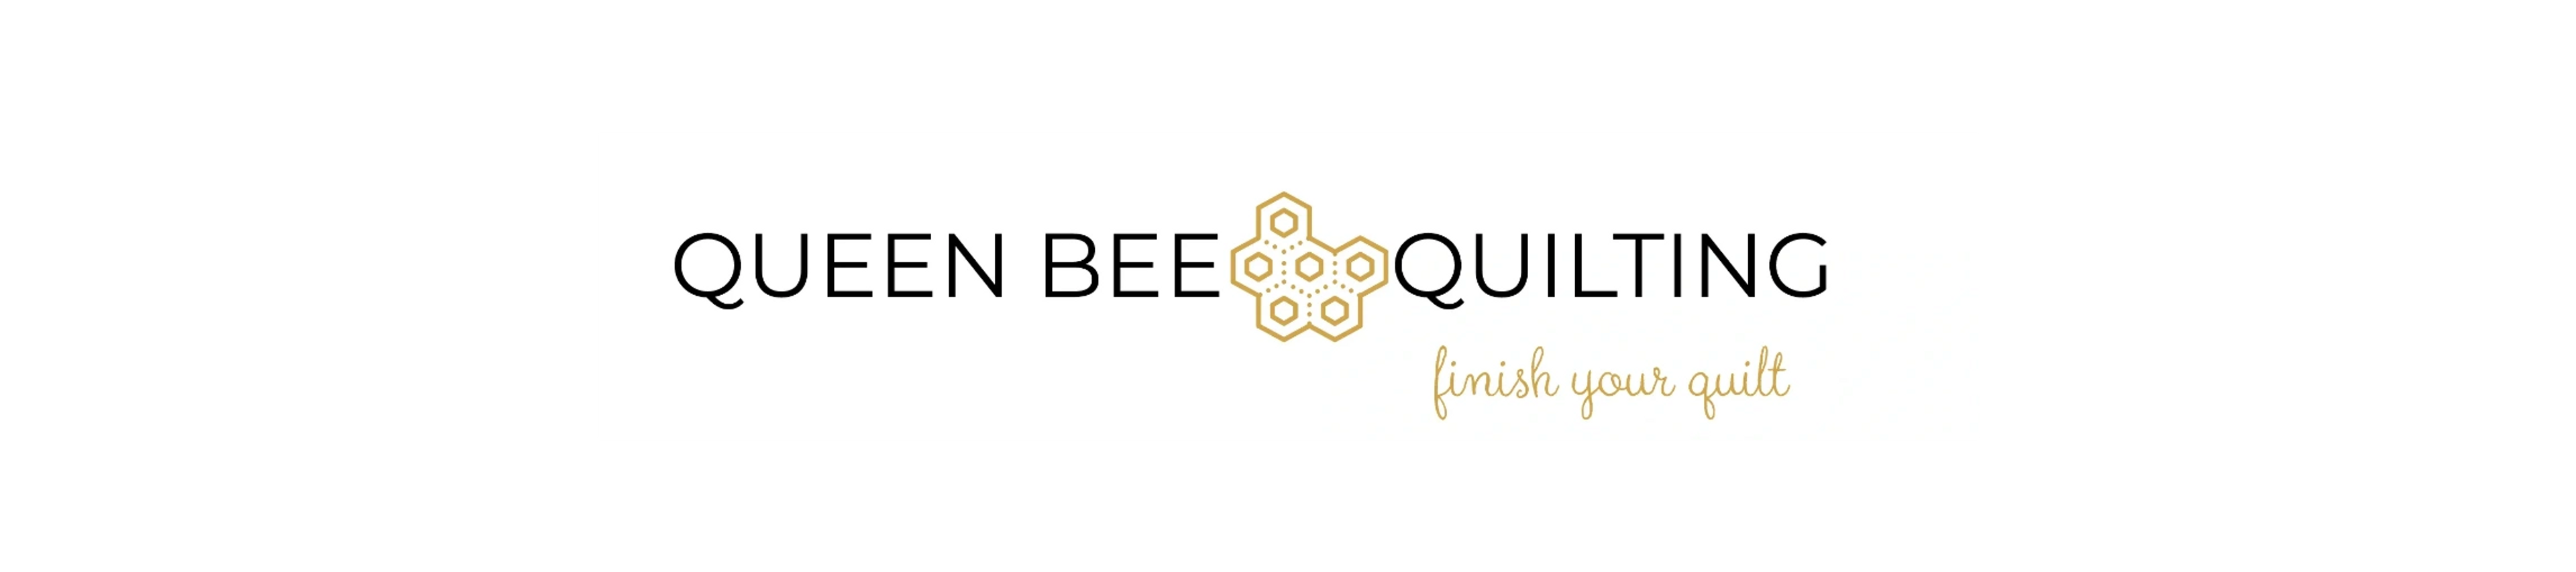 Queen Bee Quilting - offering quilting and finishing services for all your quilts.